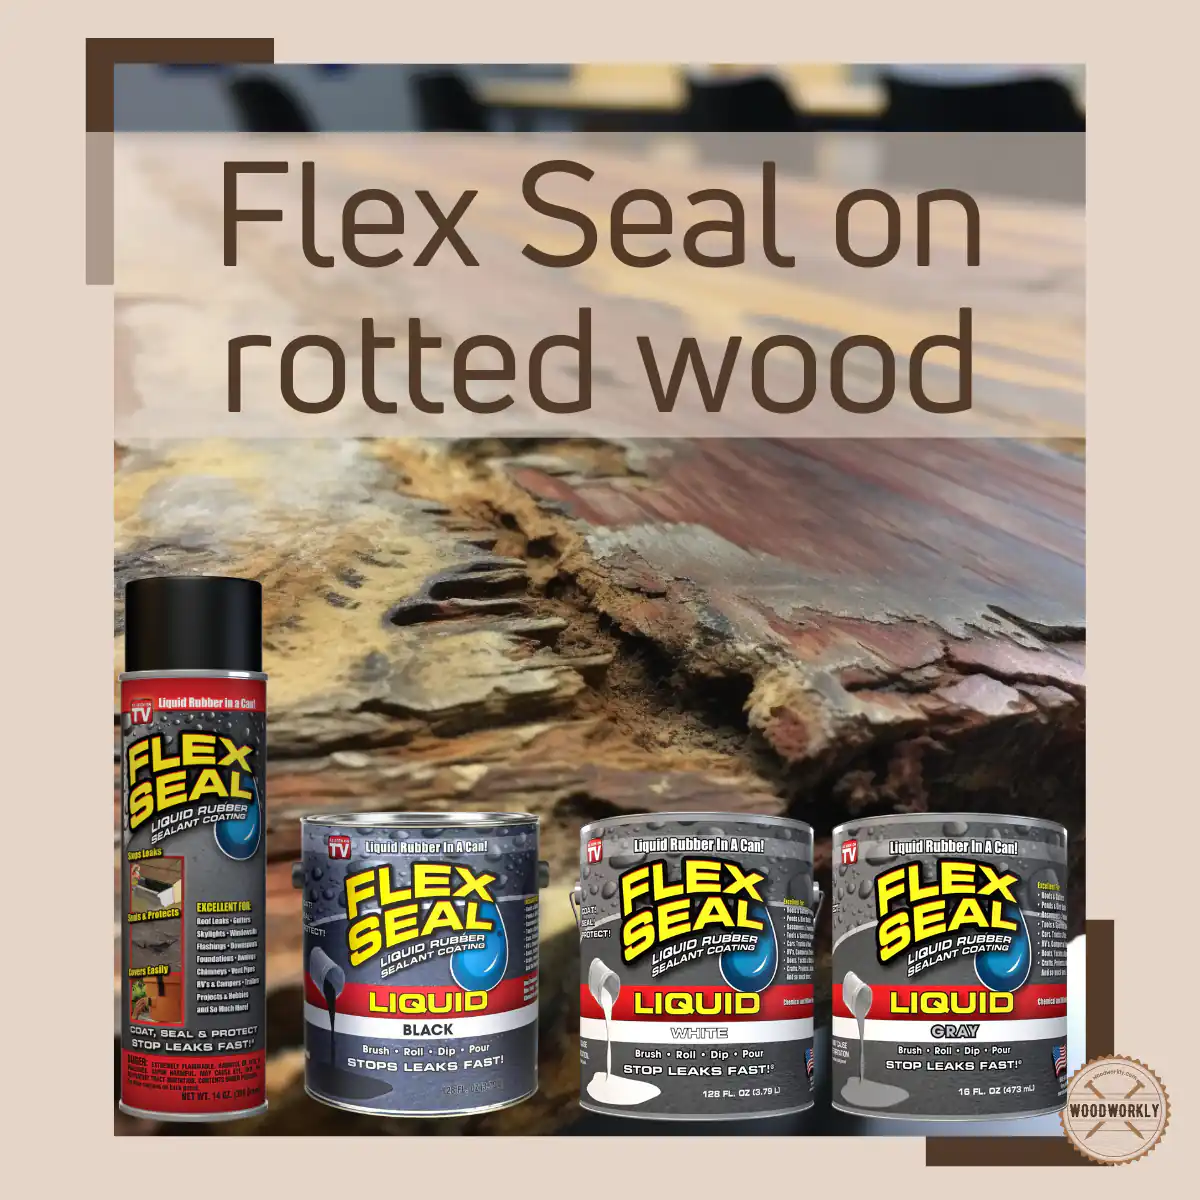 Can you use Flex Seal on rotted wood